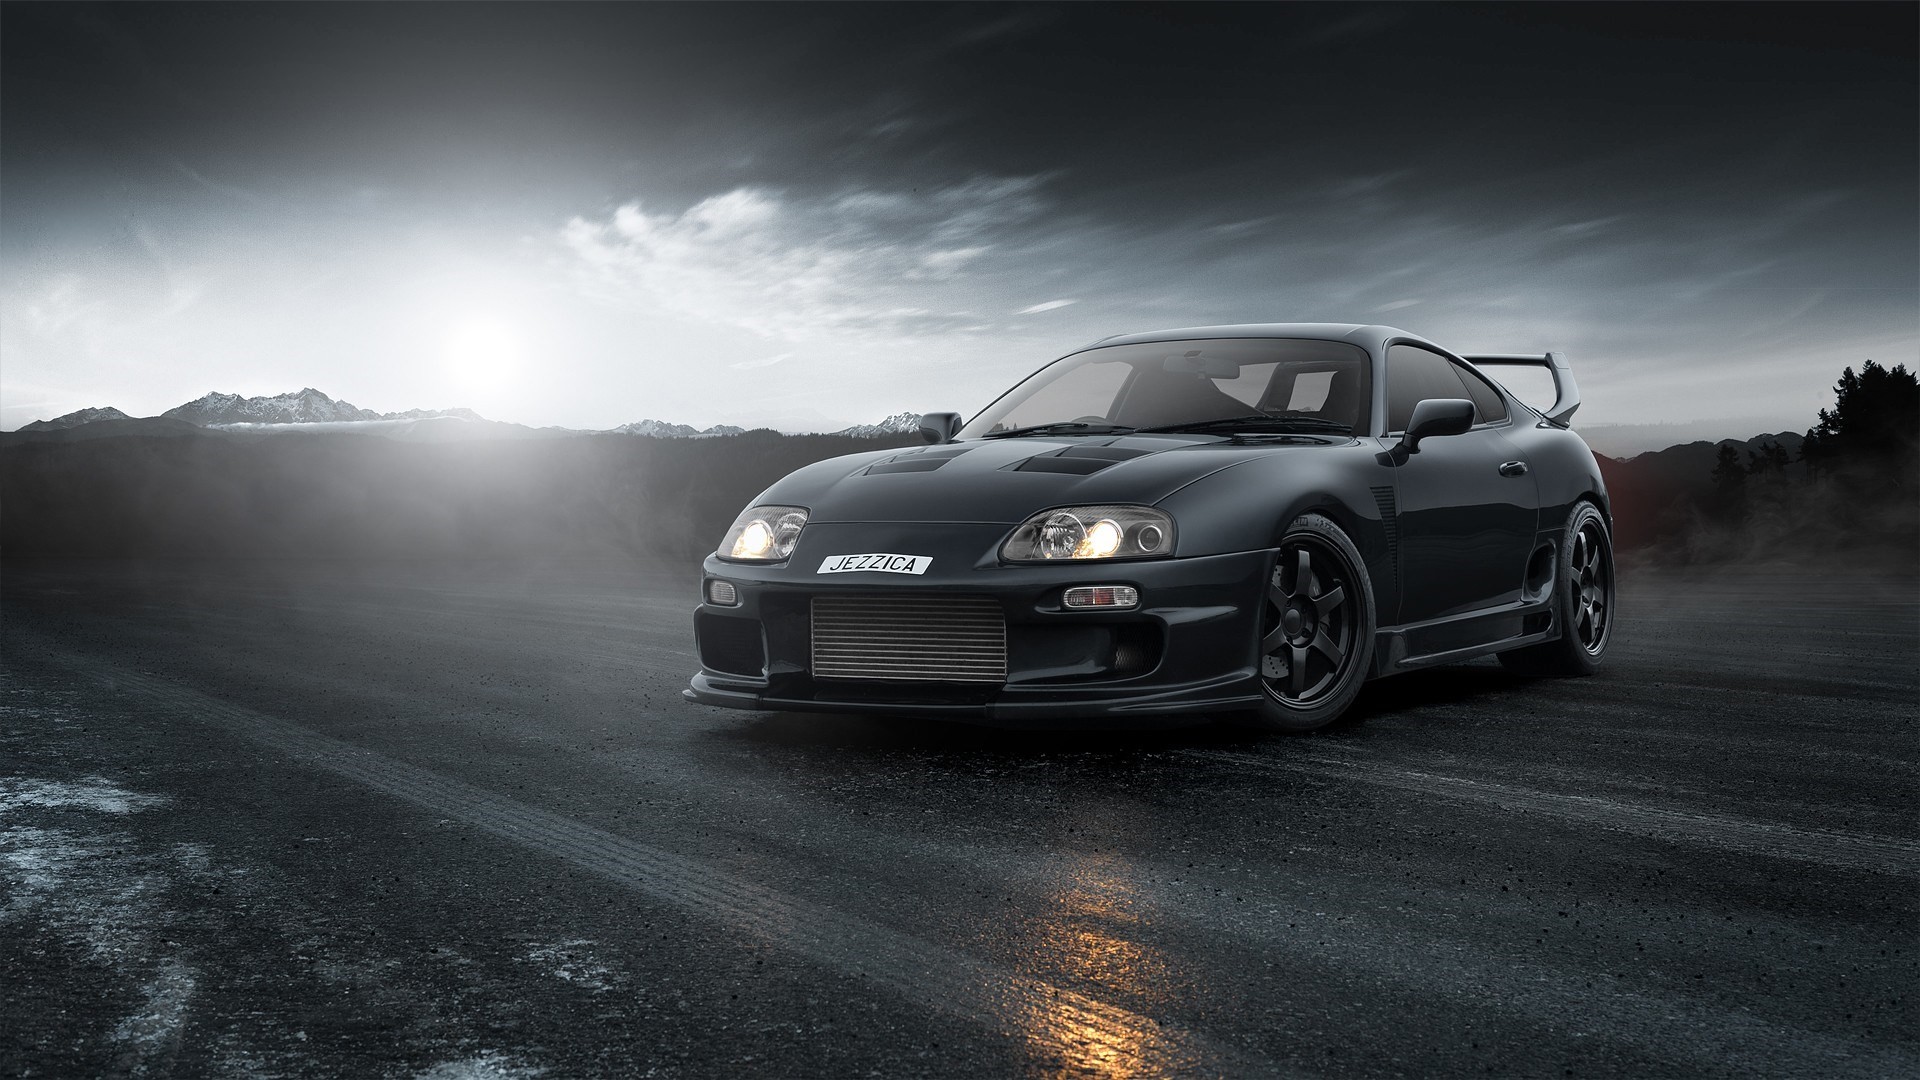 1920x1080 toyota supra fast and furious 7 wallpaper.